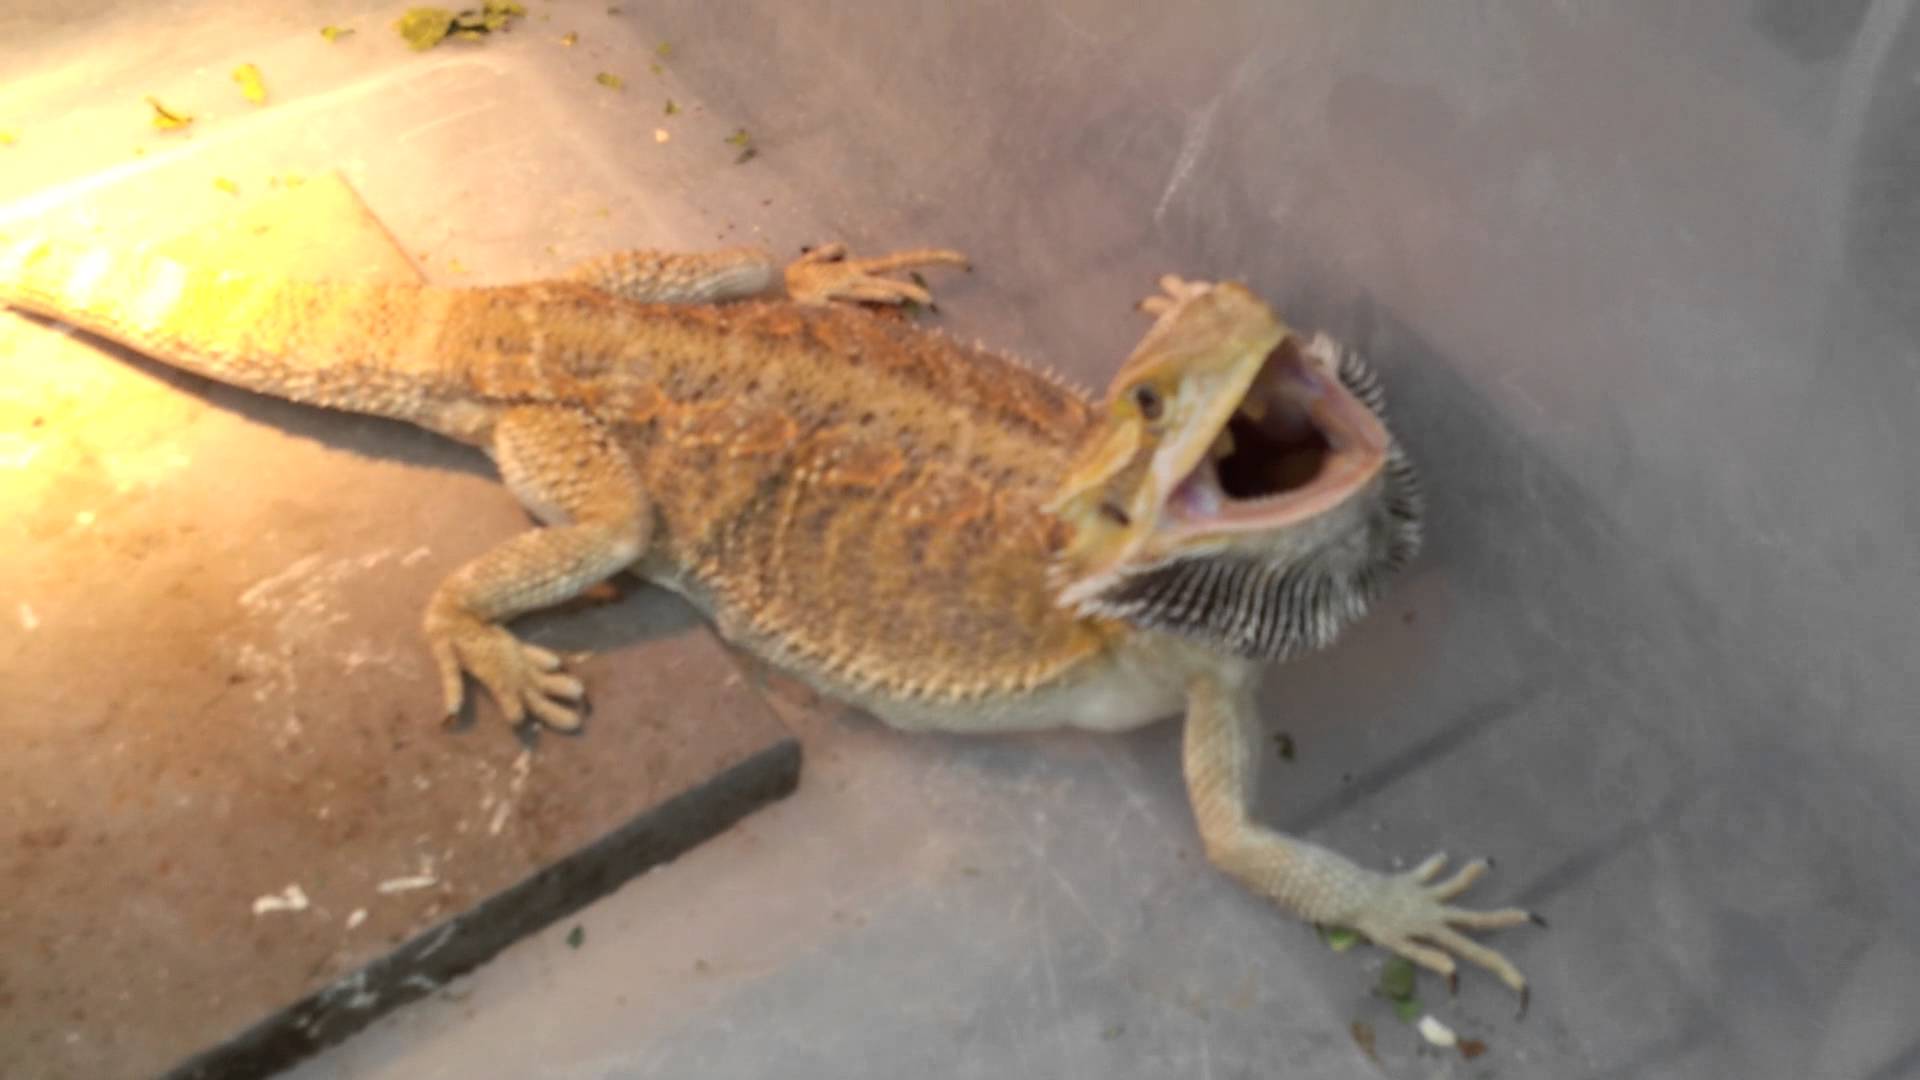 Worlds most aggressive bearded dragon. - YouTube